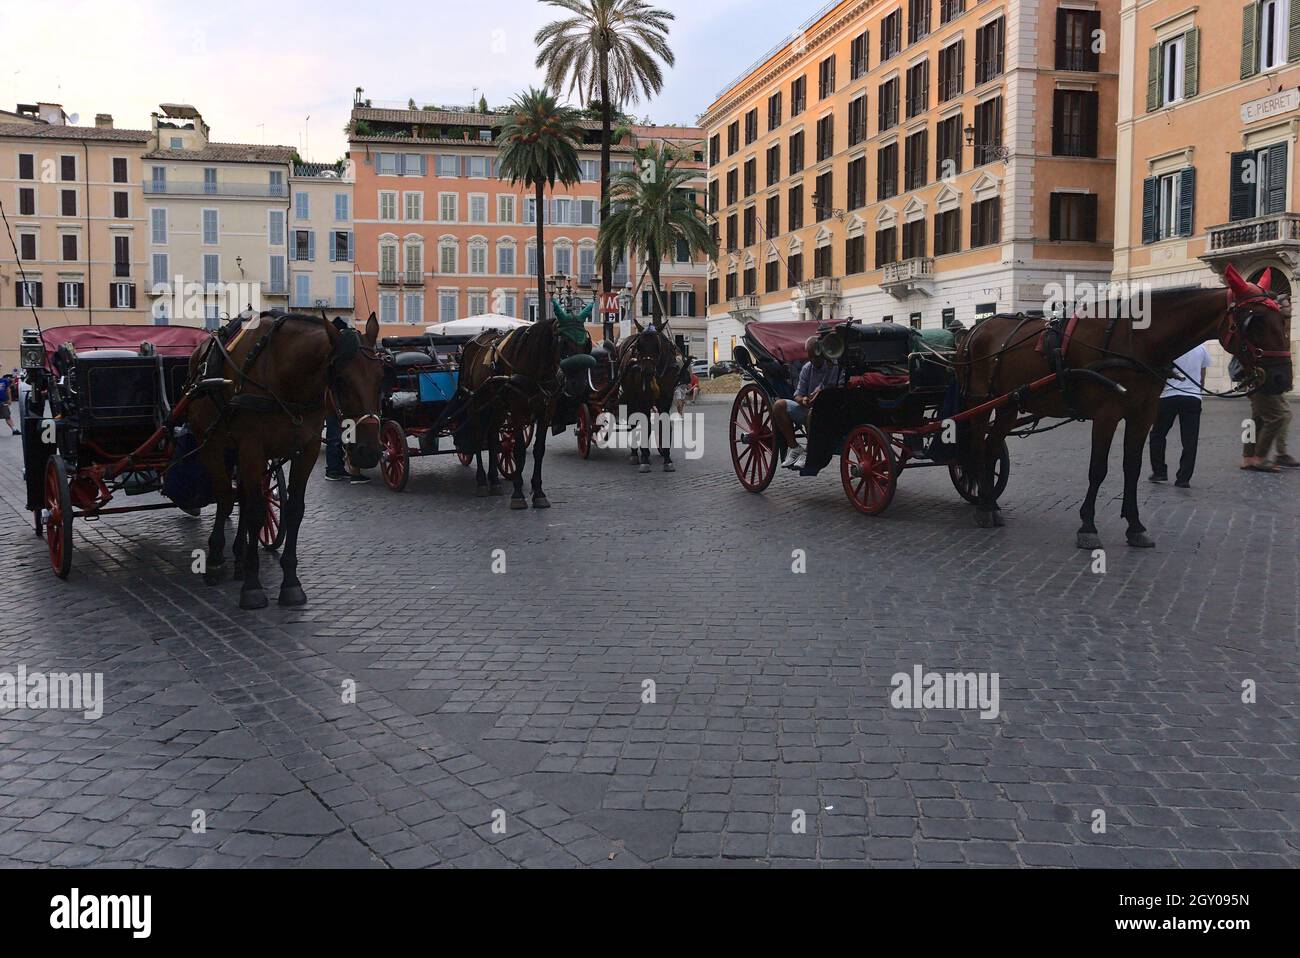 ROME, ITALY - Sep 01, 2019: Four horses and beautiful old carriages on a stone-paved street in Rome, Italy Stock Photo